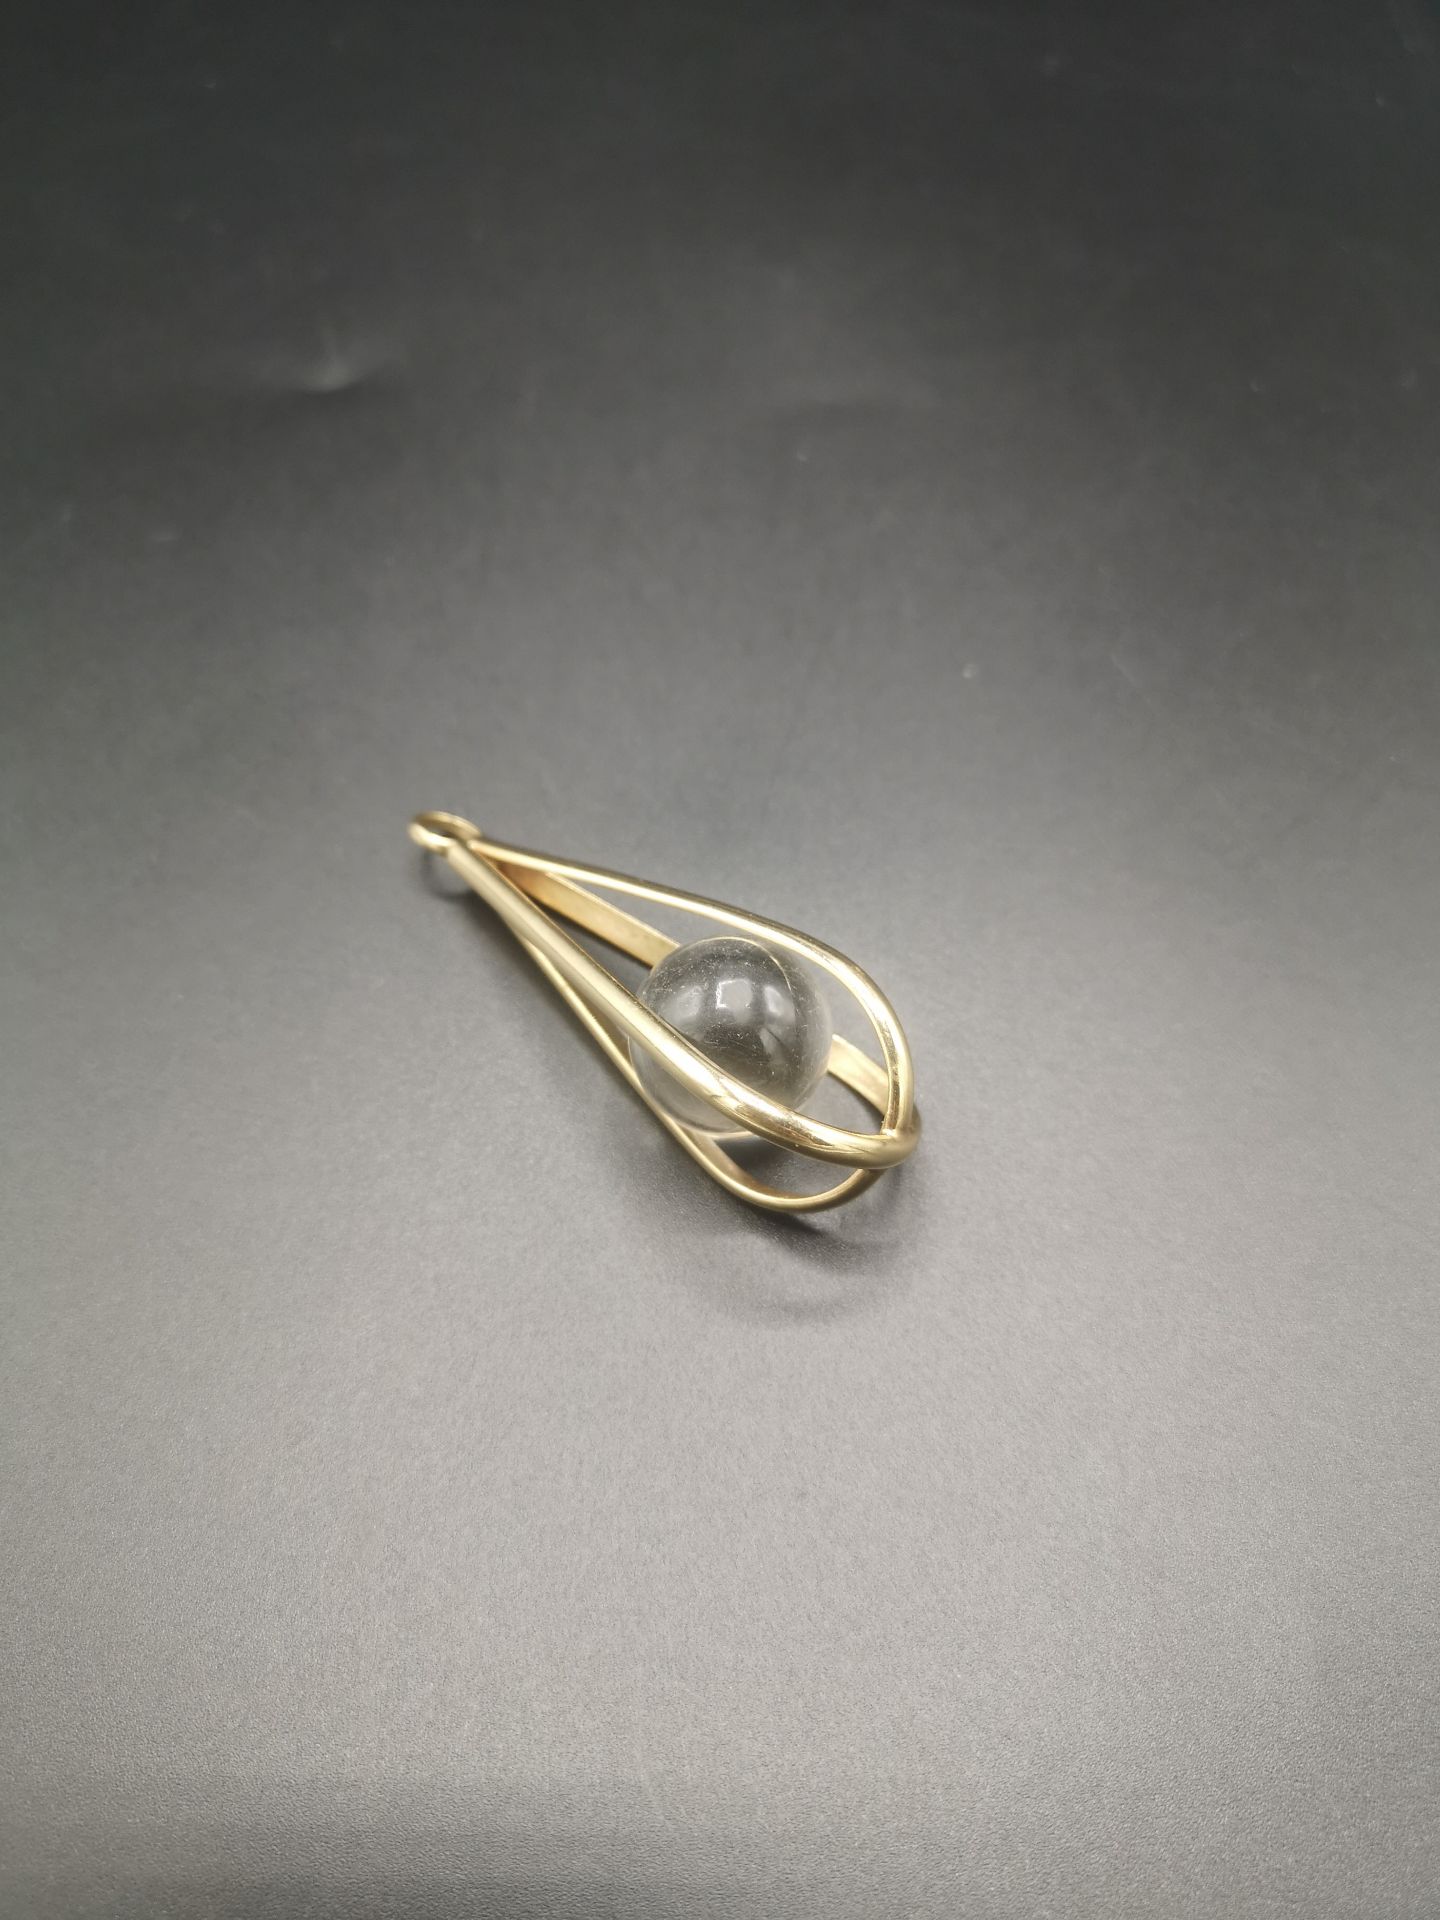 9ct gold pendant - Image 7 of 8